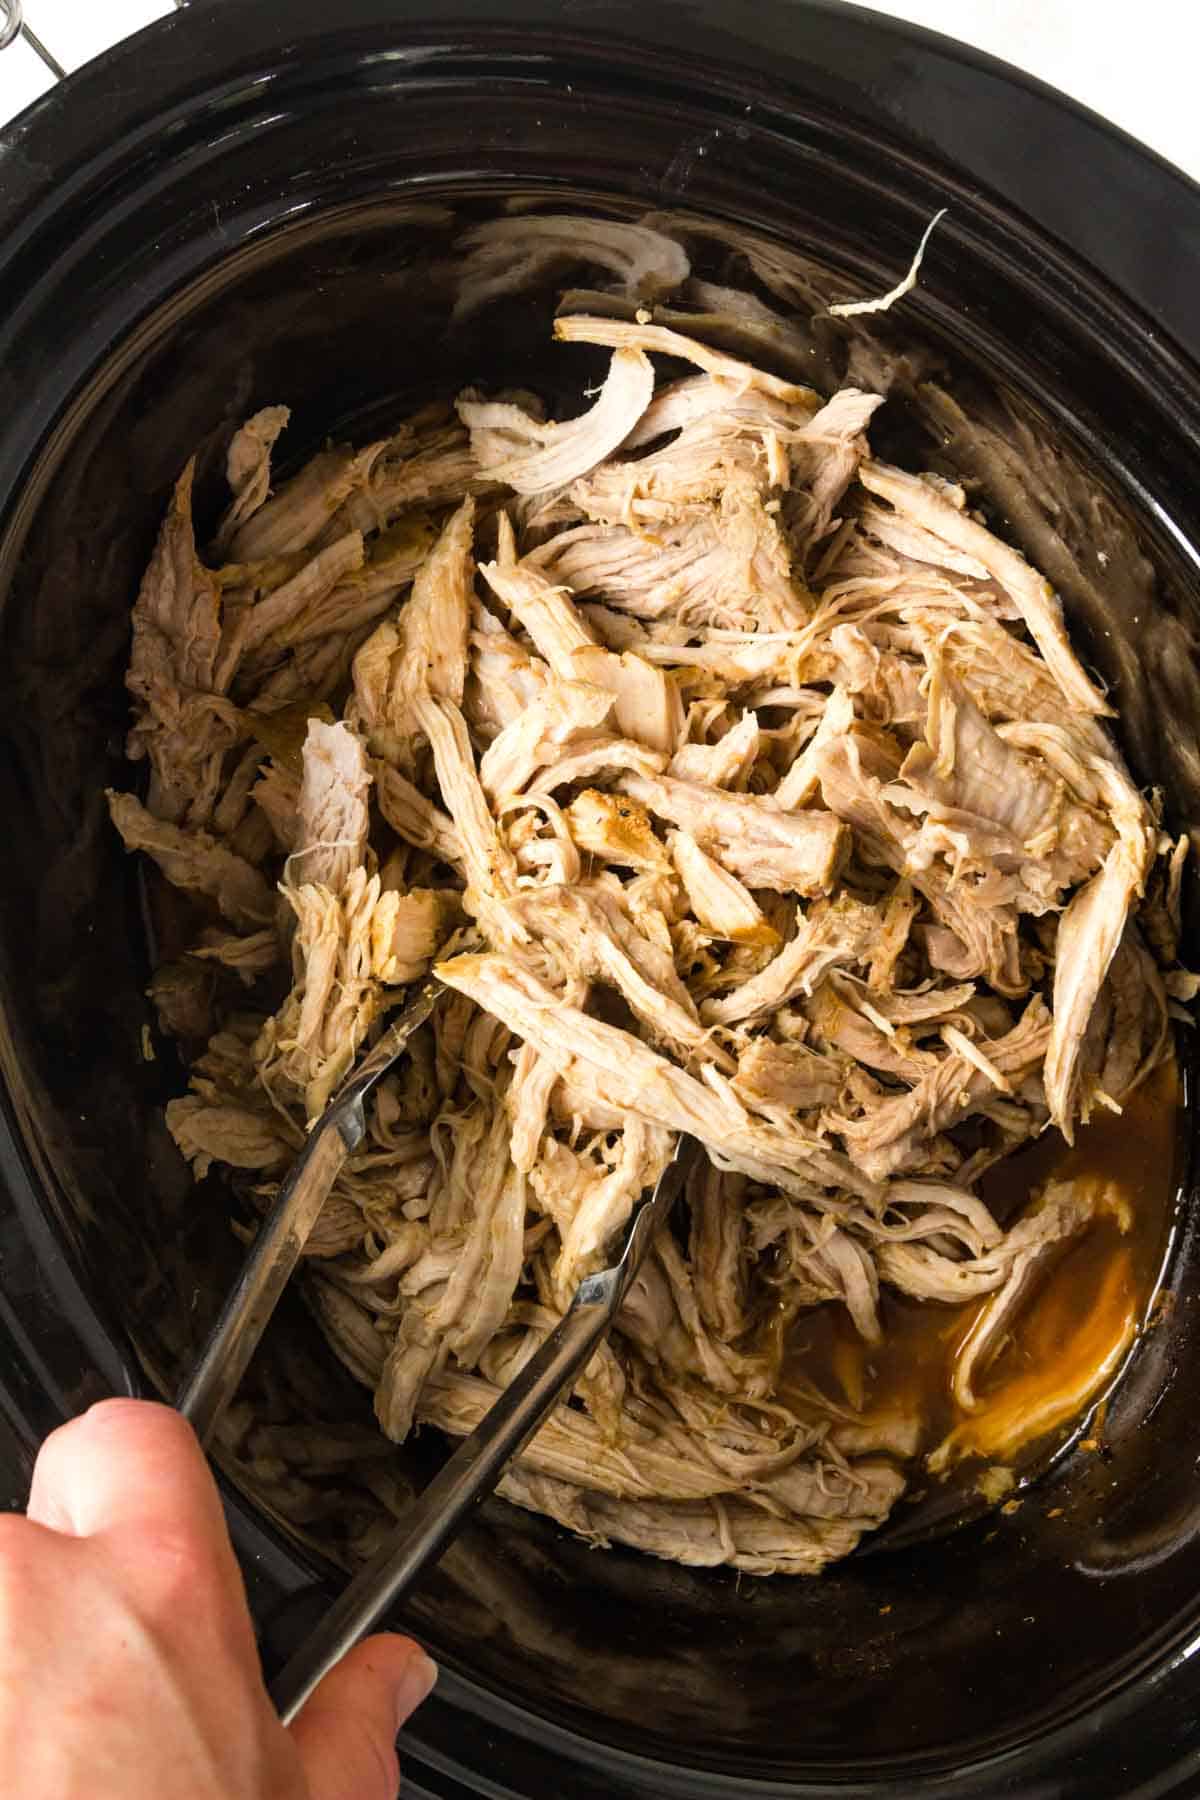 Using tongs to toss thw shredded pork in the juices in the crockpot.